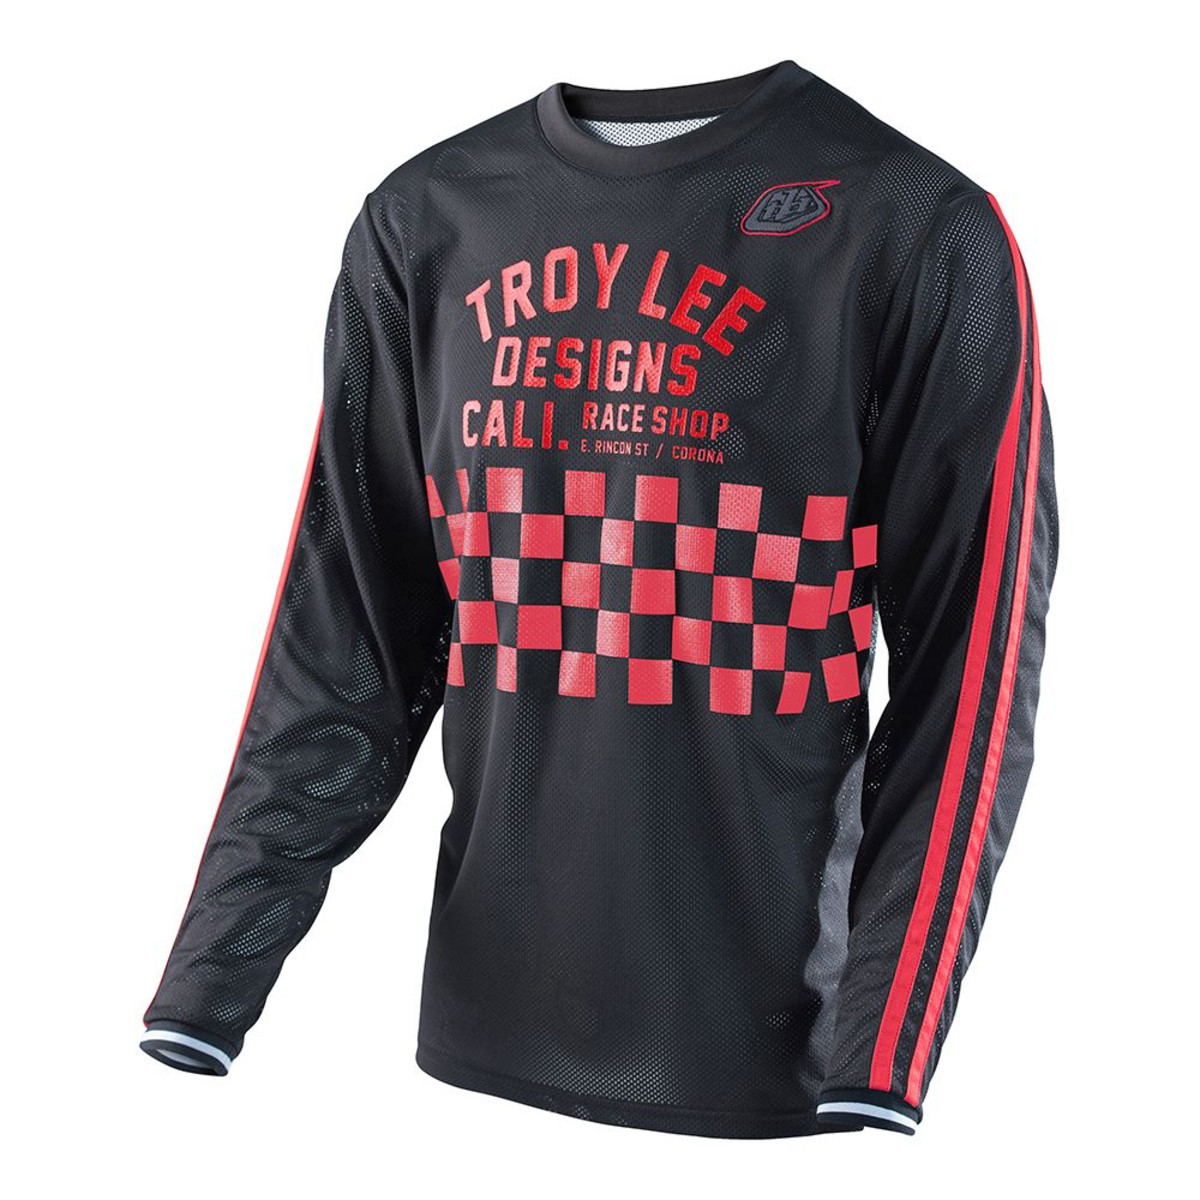 Troy Lee Designs Maillot VTT Manches Longues Super Retro Black/Red